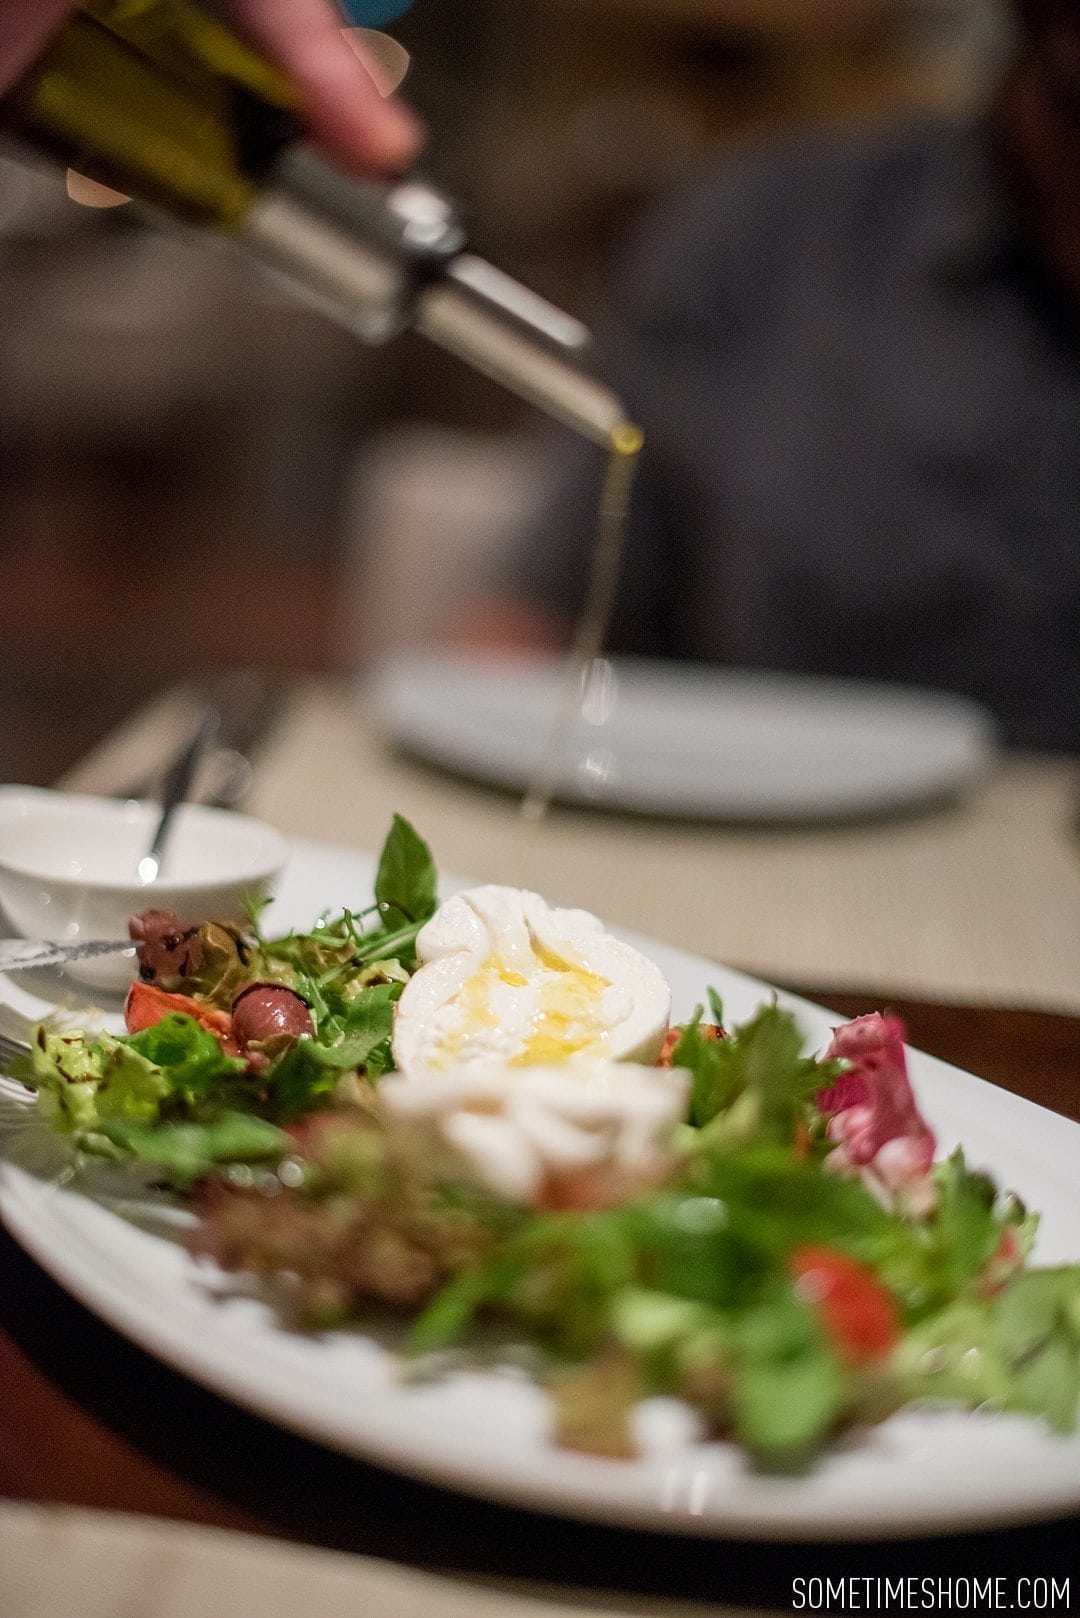 Where to Find Incredible Alternative Cuisine in Chiang Mai. Photos by Sometimes Home at Favola Italian restaurant at Le Meridien. Detail photo of buffalo mozzarella salad.